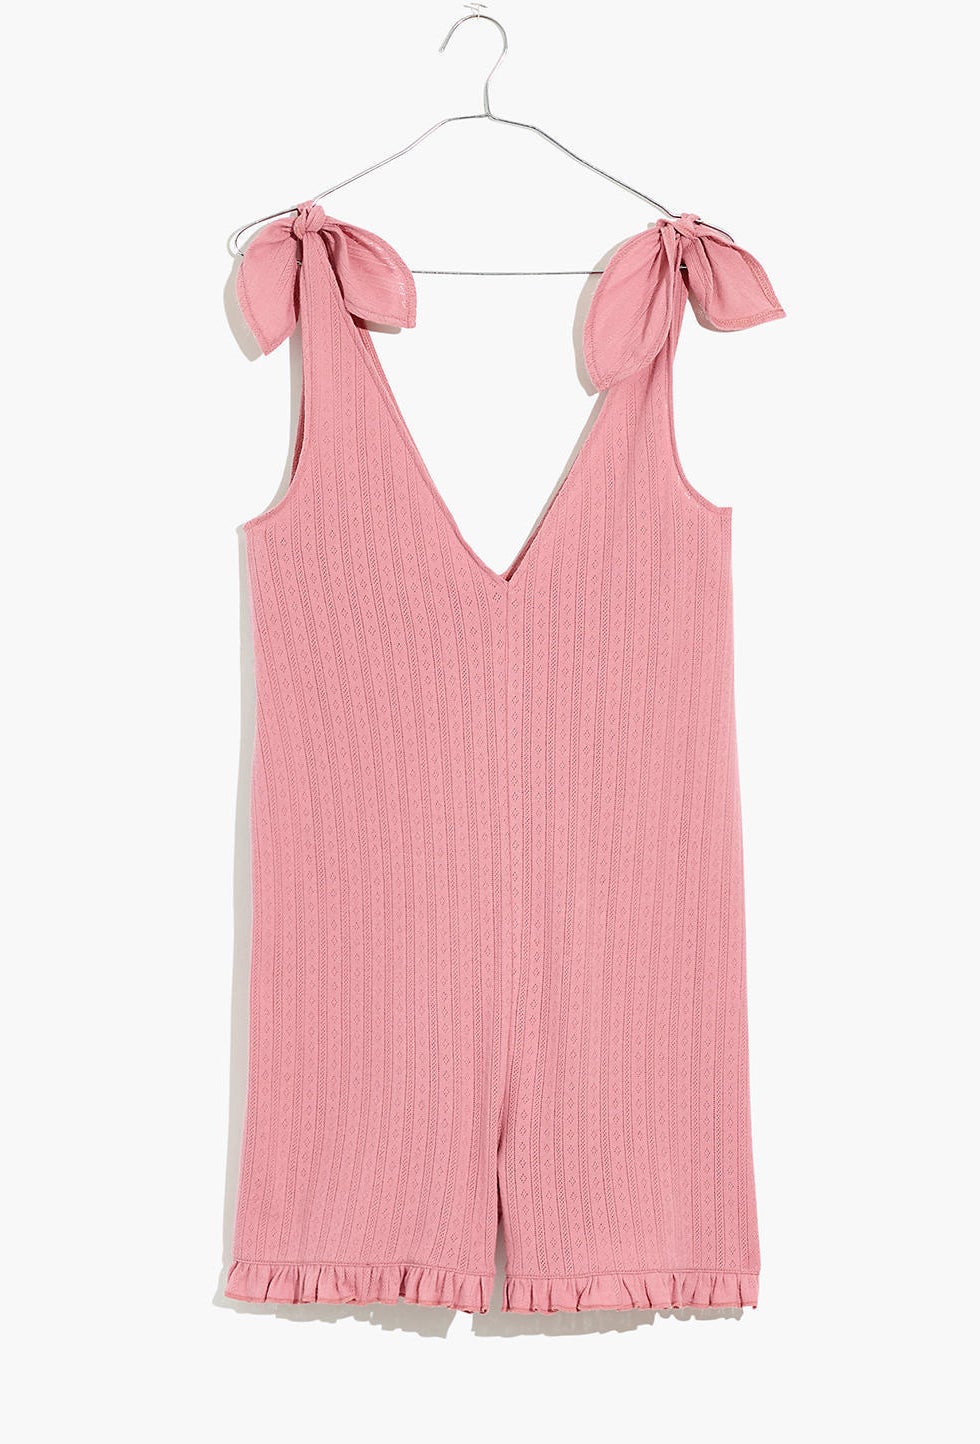 21 Pairs Of PJs For Anyone Looking To Stay Cool This Summer